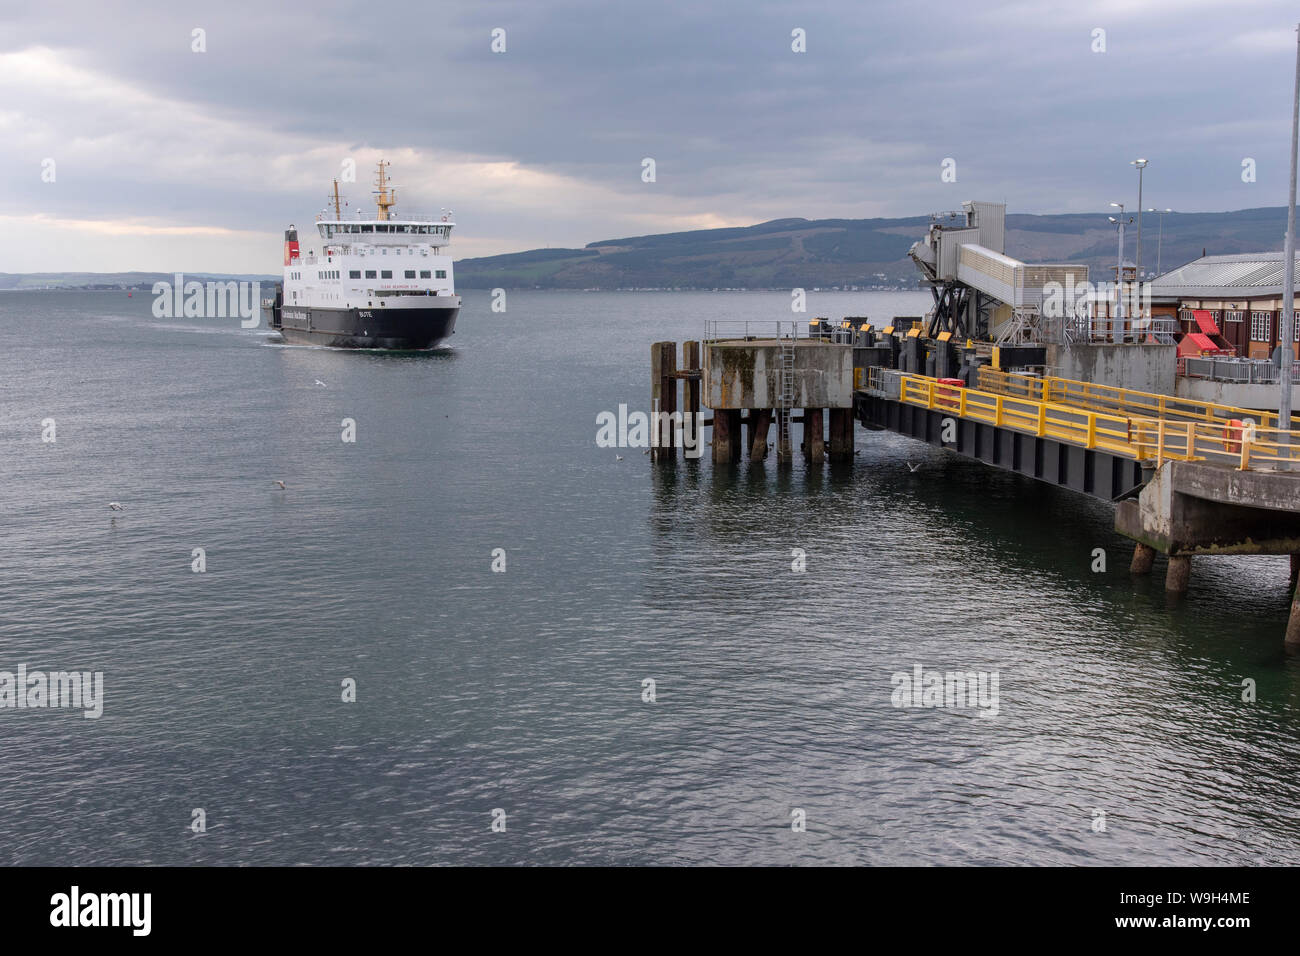 A CalMac ferry operating on the Rothesay to Wemyss Bay crossing. Stock Photo